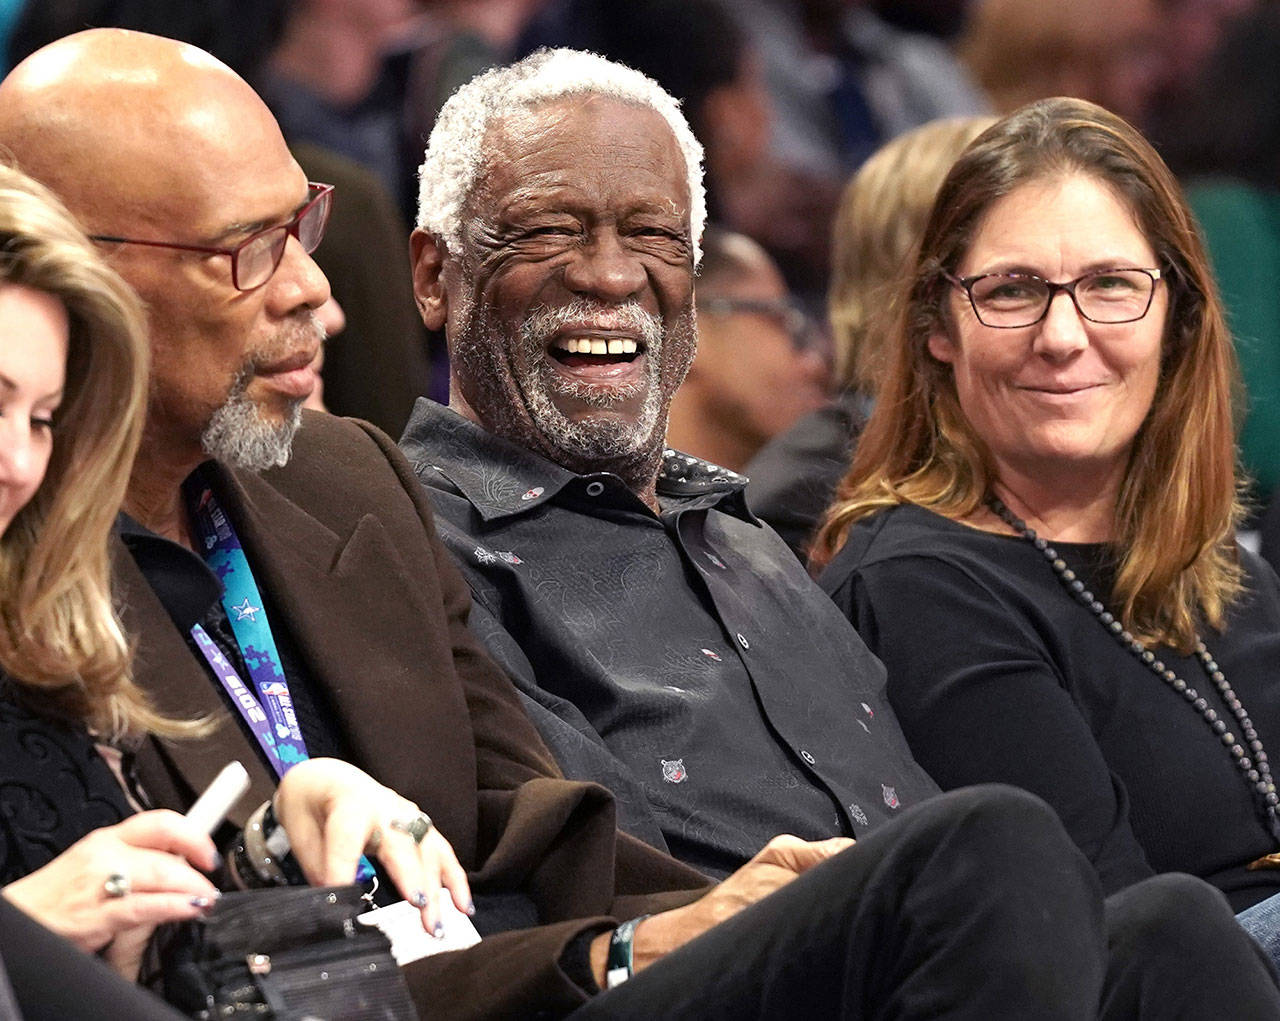 NBA legend Bill Russell smiles at others along courtside during the NBA All-Star Saturday Night festivities at Spectrum Center in Charlotte, N.C., on Saturday, Feb. 16, 2019. (Jeff Siner/Charlotte Observer/TNS)